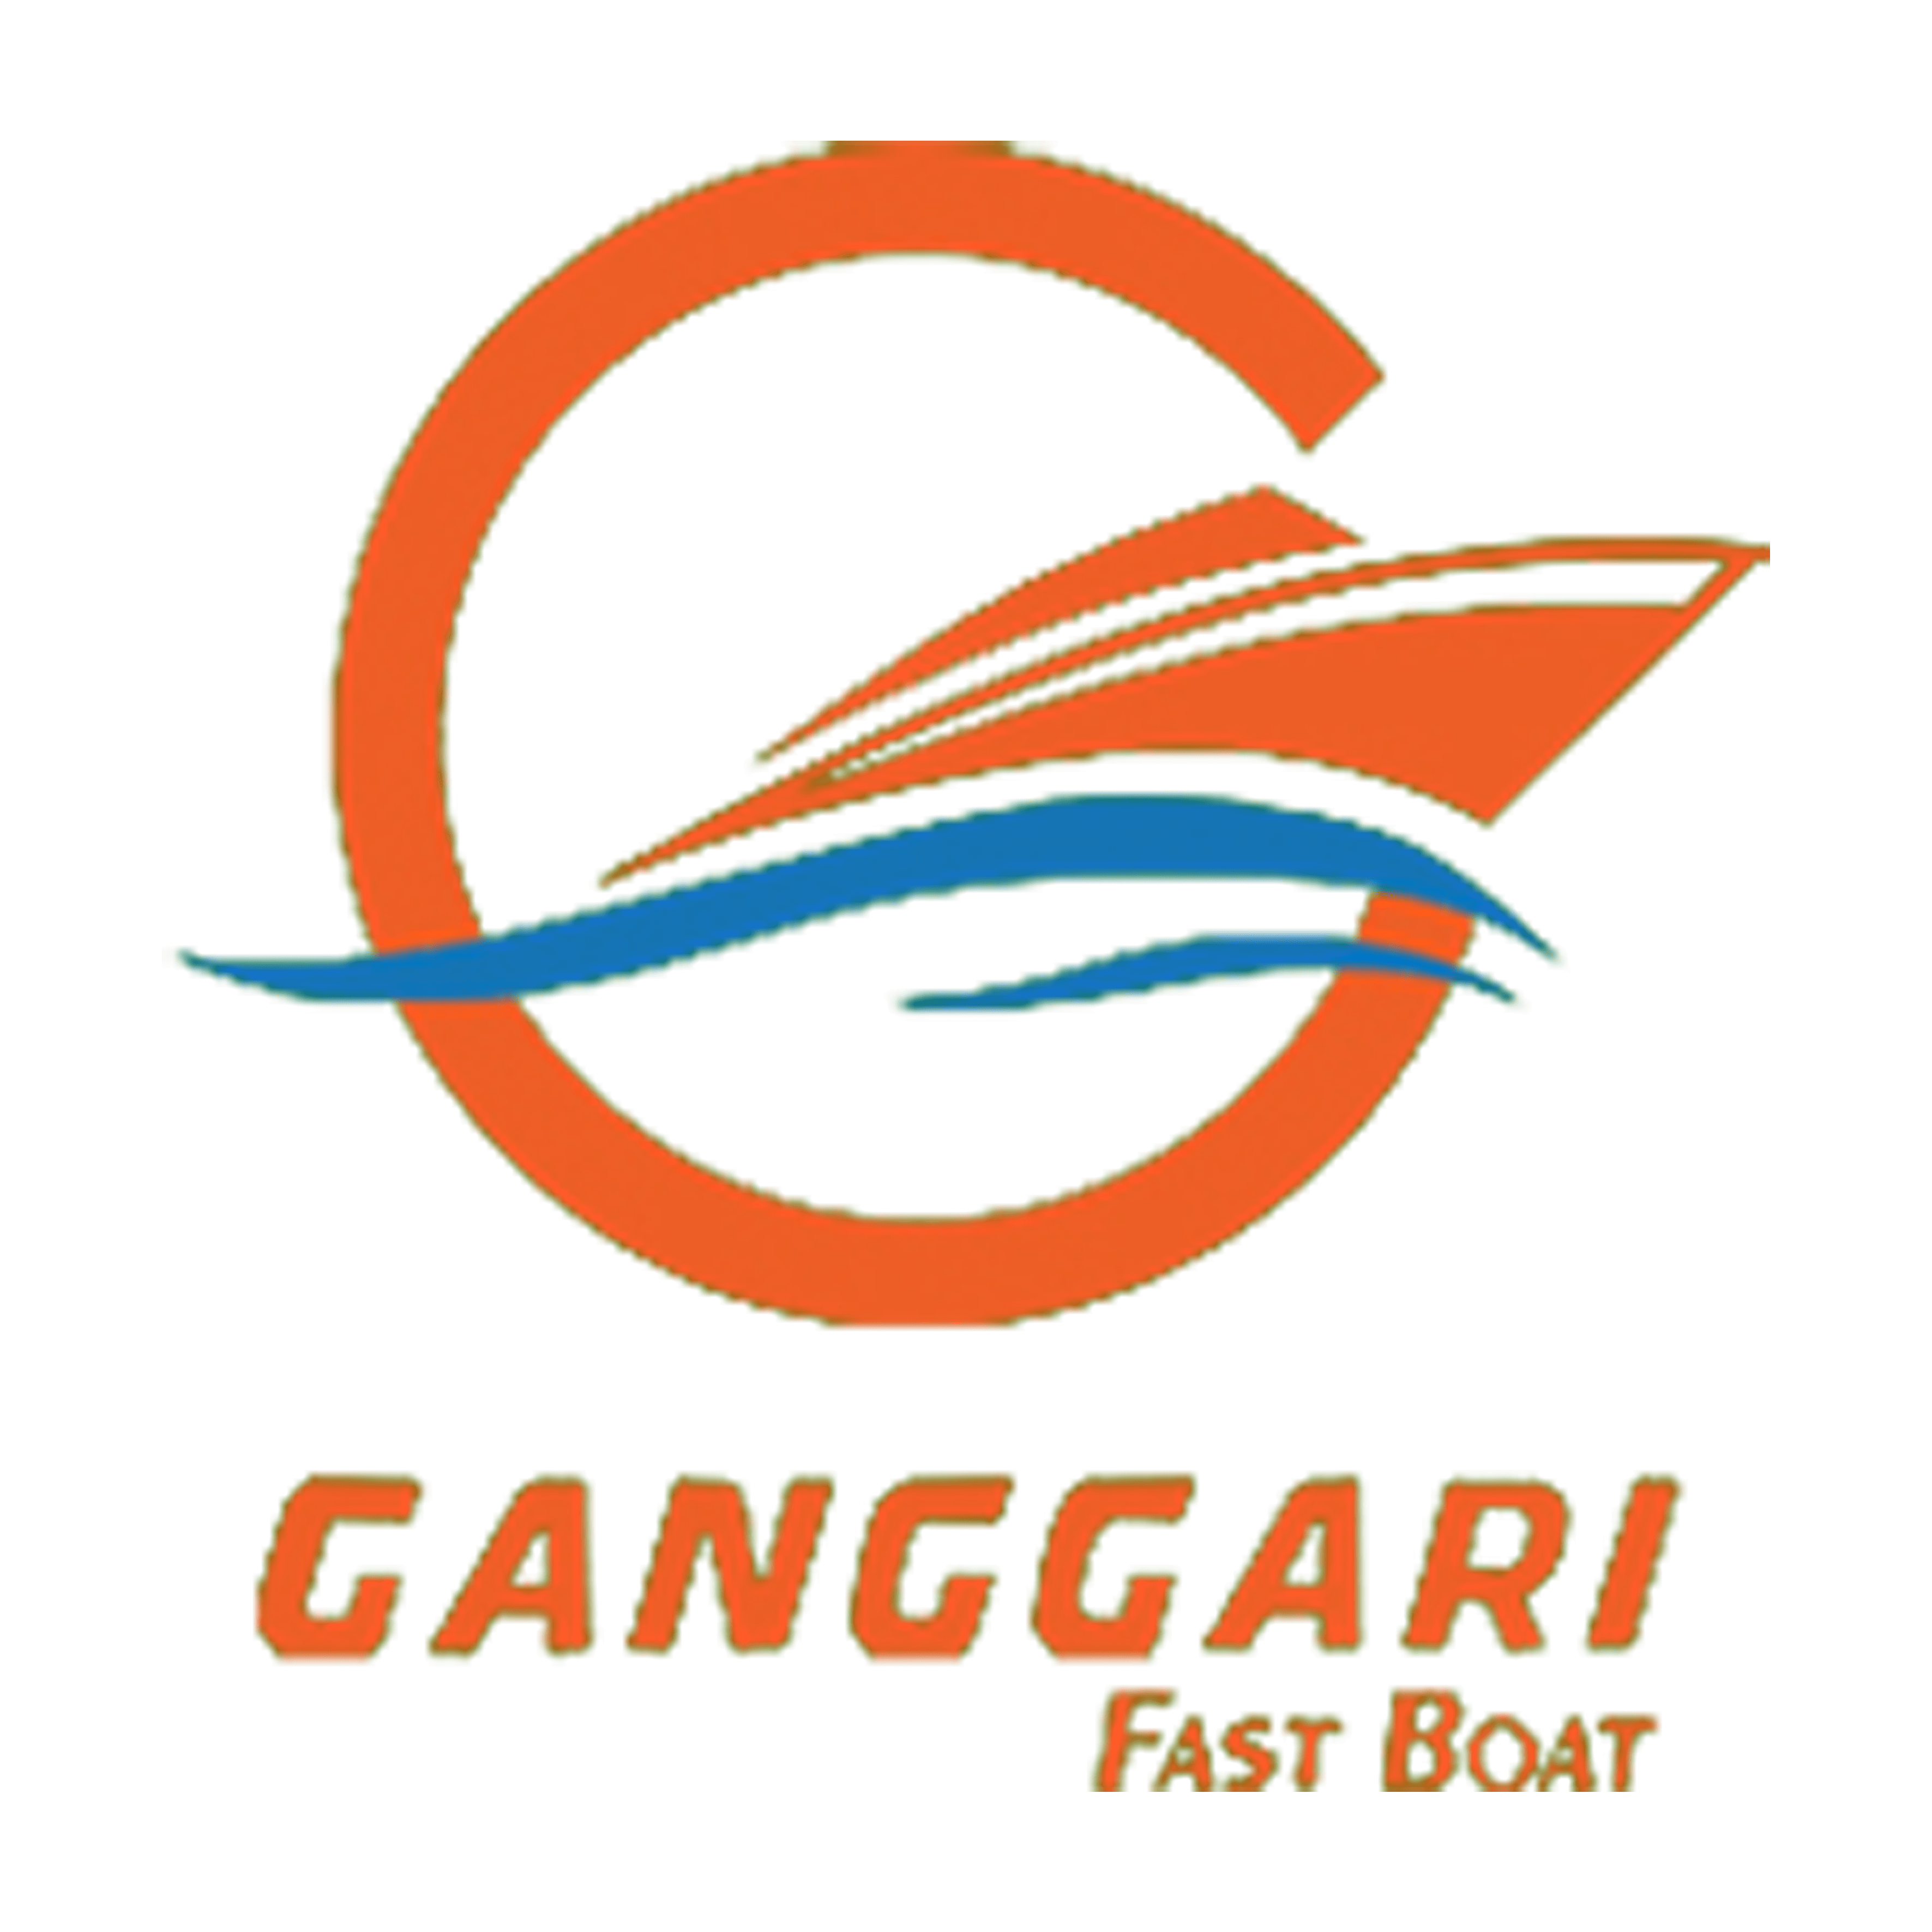 Ganggari Fast Boat prices, tickets and schedules